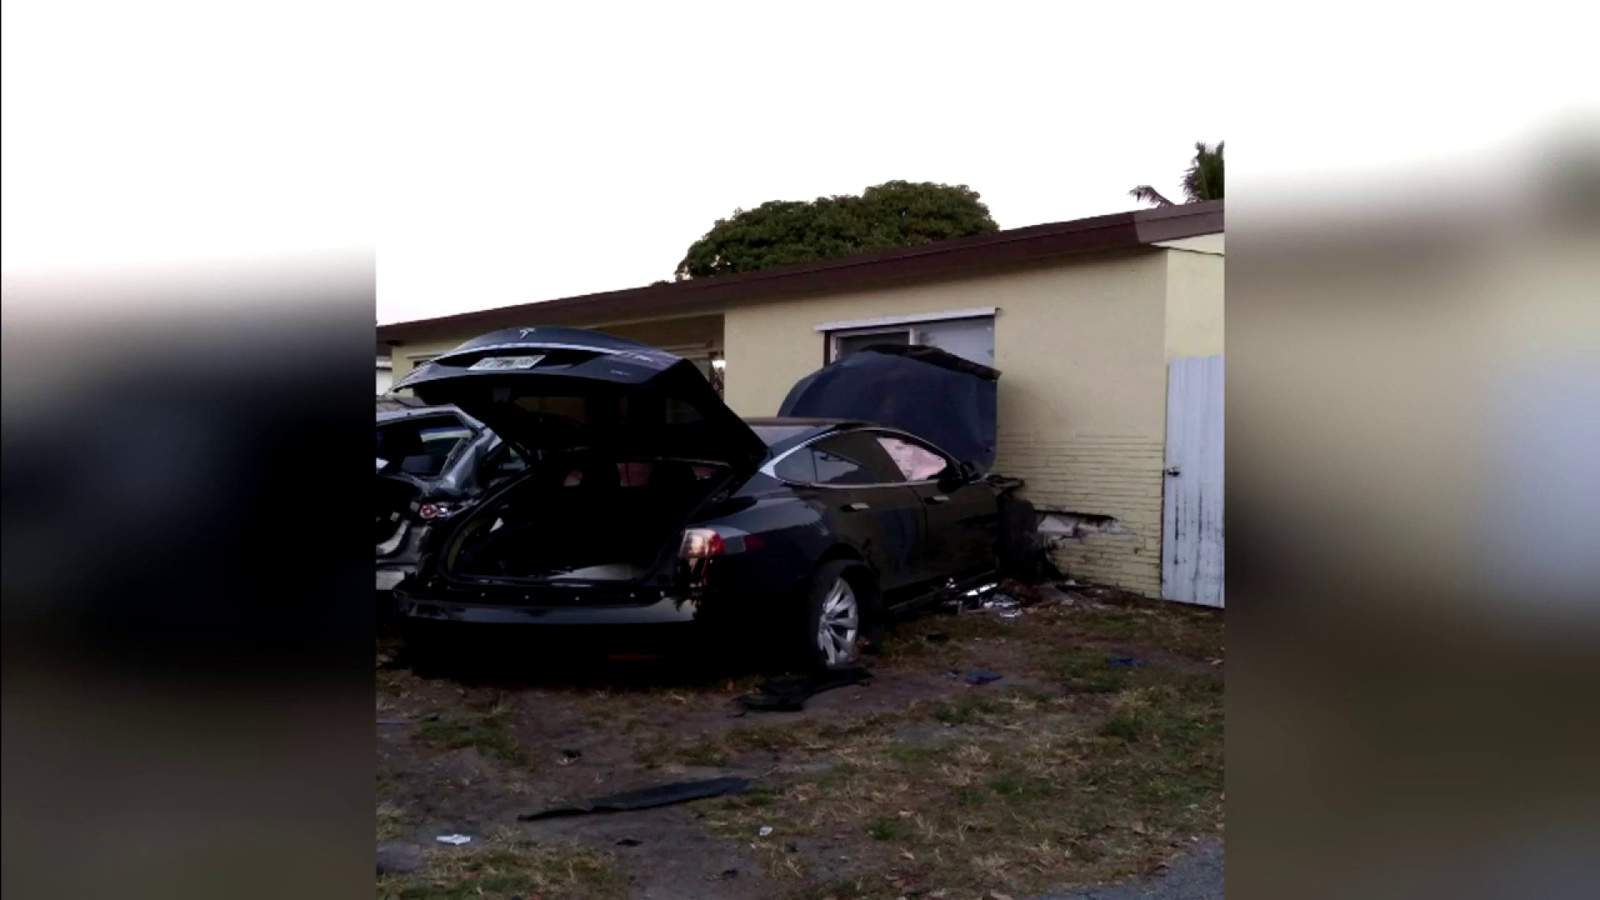 The high speed can be caused by a driver who hit Tesla in the house in Miramar